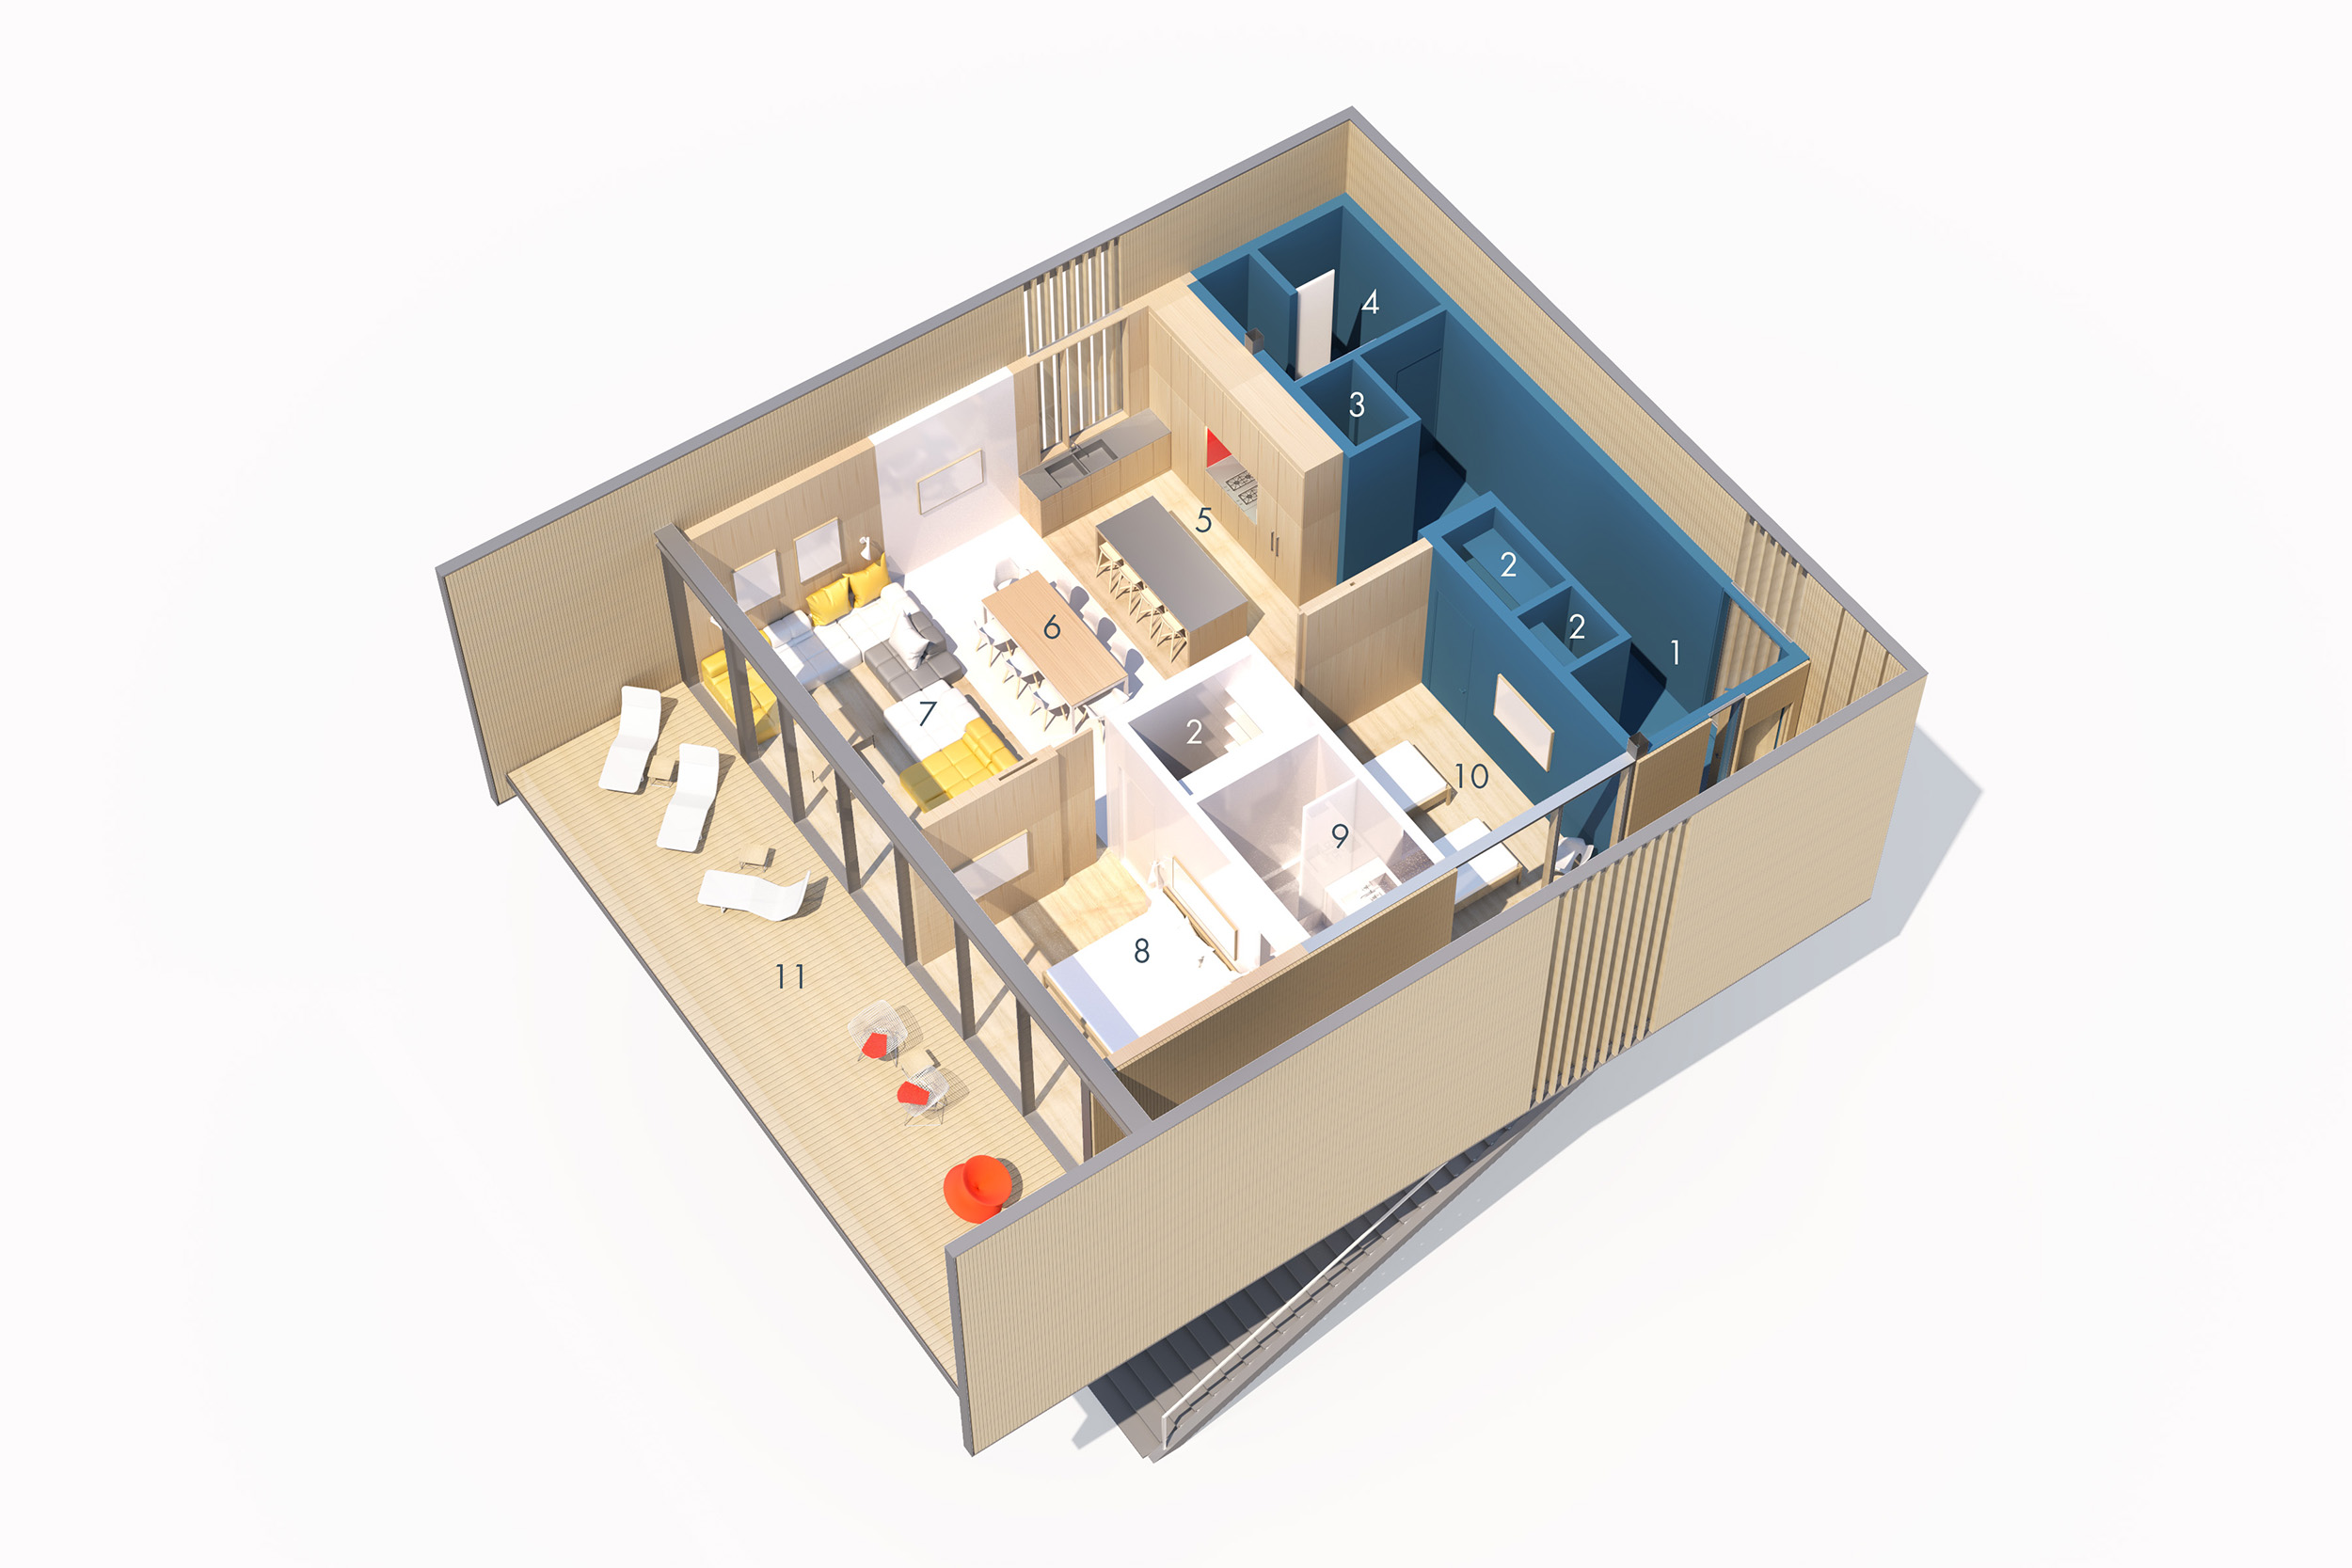  Lookout House - Interior Layout 